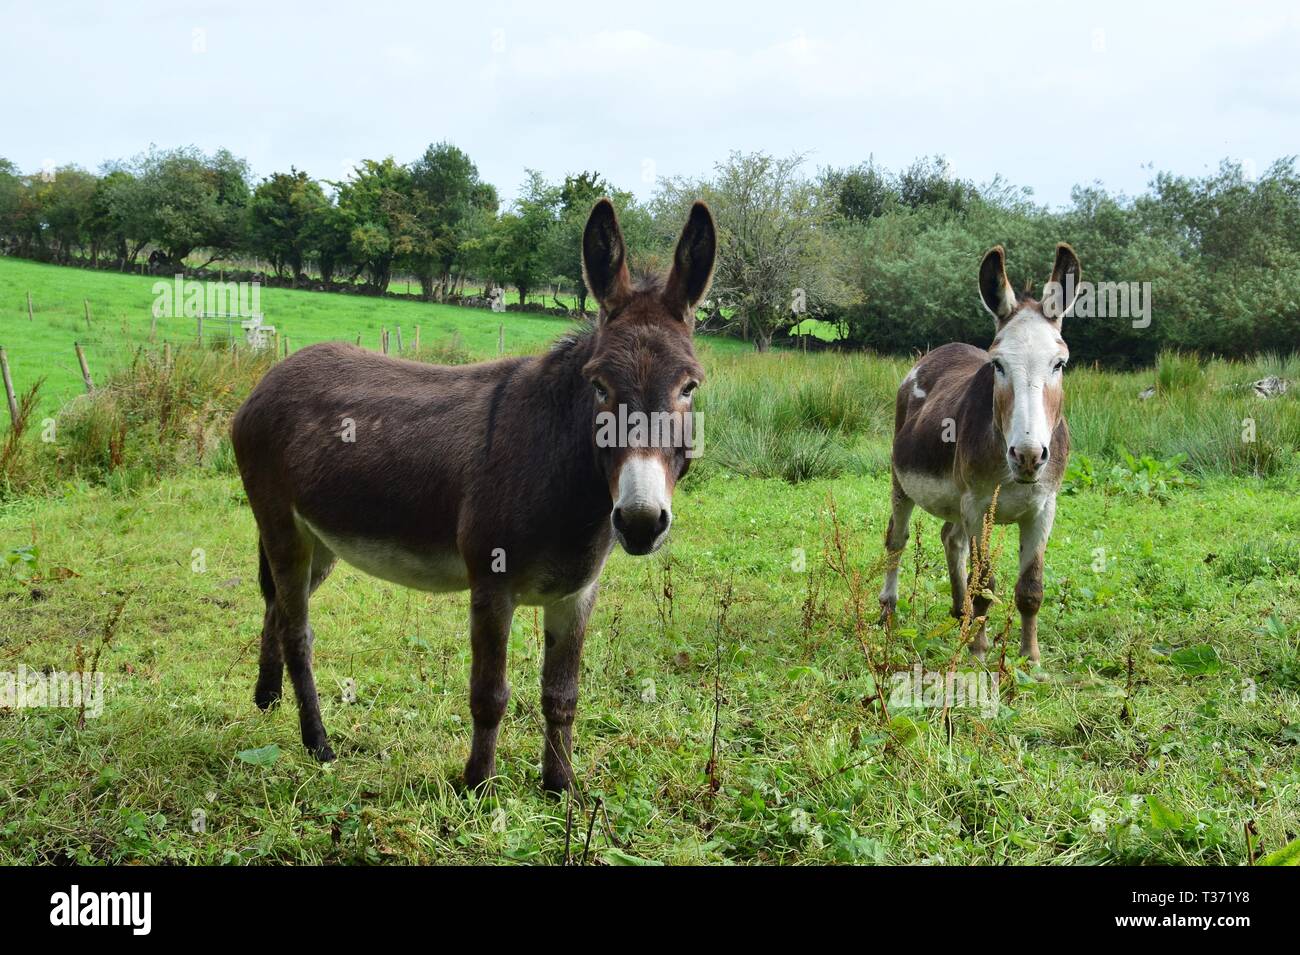 Two donkeys on a meadow in Ireland, one brown and one piebald. Landscape in the background. Stock Photo